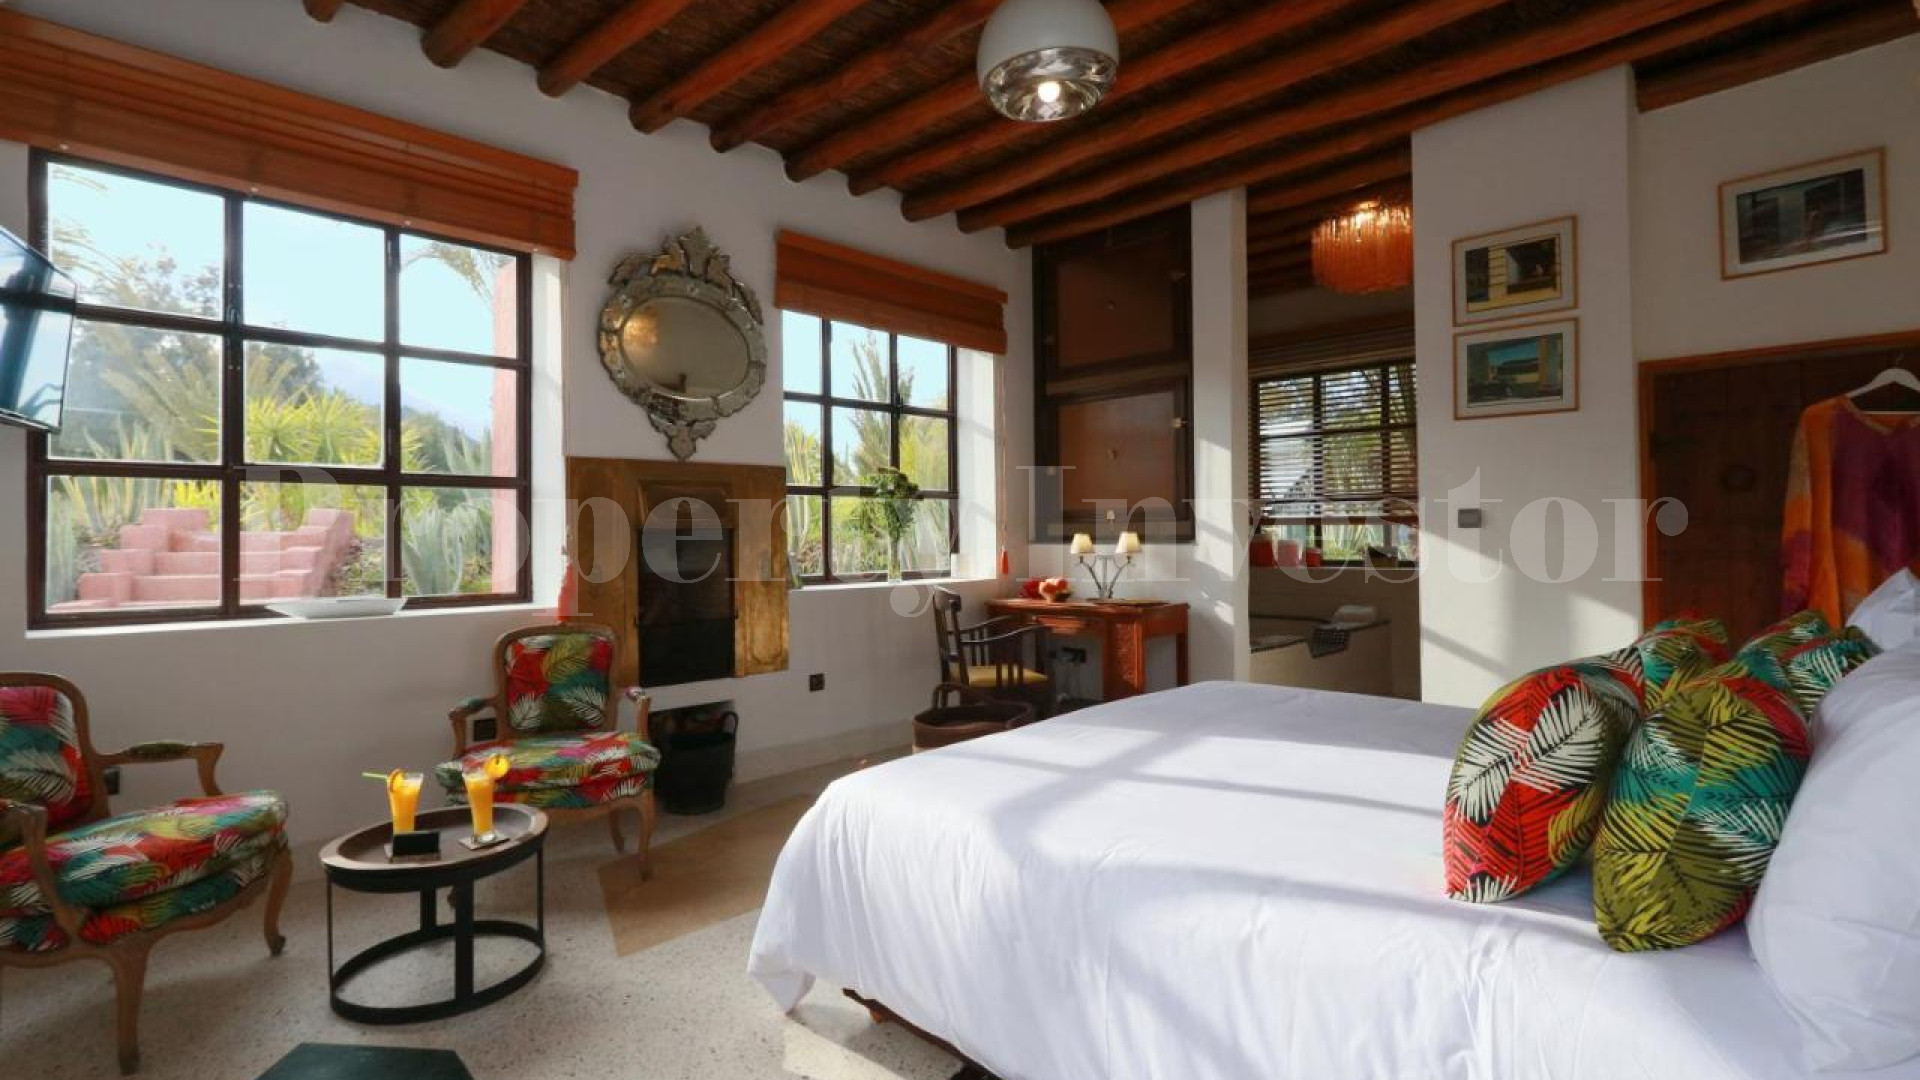 Upscale 10 Suite Boutique Ecolodge for Sale at the Foot of the Atlas Mountains, Morocco